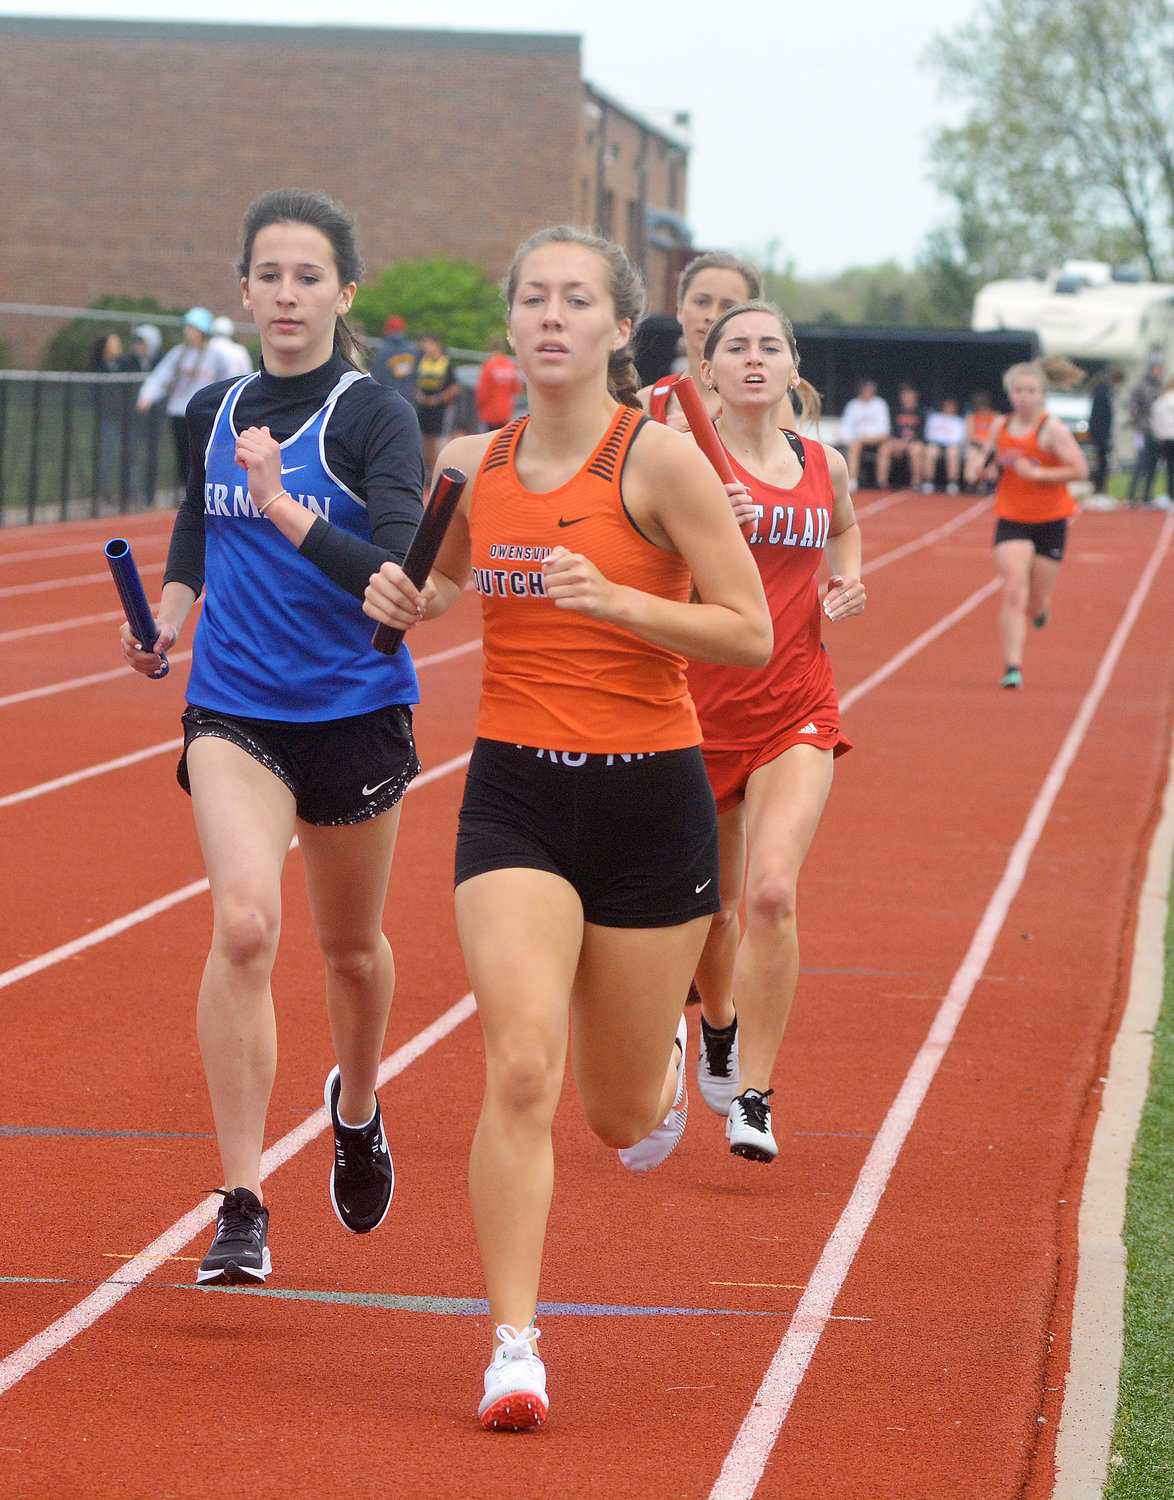 Kyah Weirich (center) is shown competing in the annual Four Rivers Conference (FRC) track meet this past spring hosted by Owensville High School at Dutchmen Field during the varsity girls 4x800-meter relay. Weirich’s senior season ended during the Missouri State High School Activities Association (MSHSAA) Class 3 Sectional 3 Track Meet at Hollister High School following a fifth-place finish in the same event.